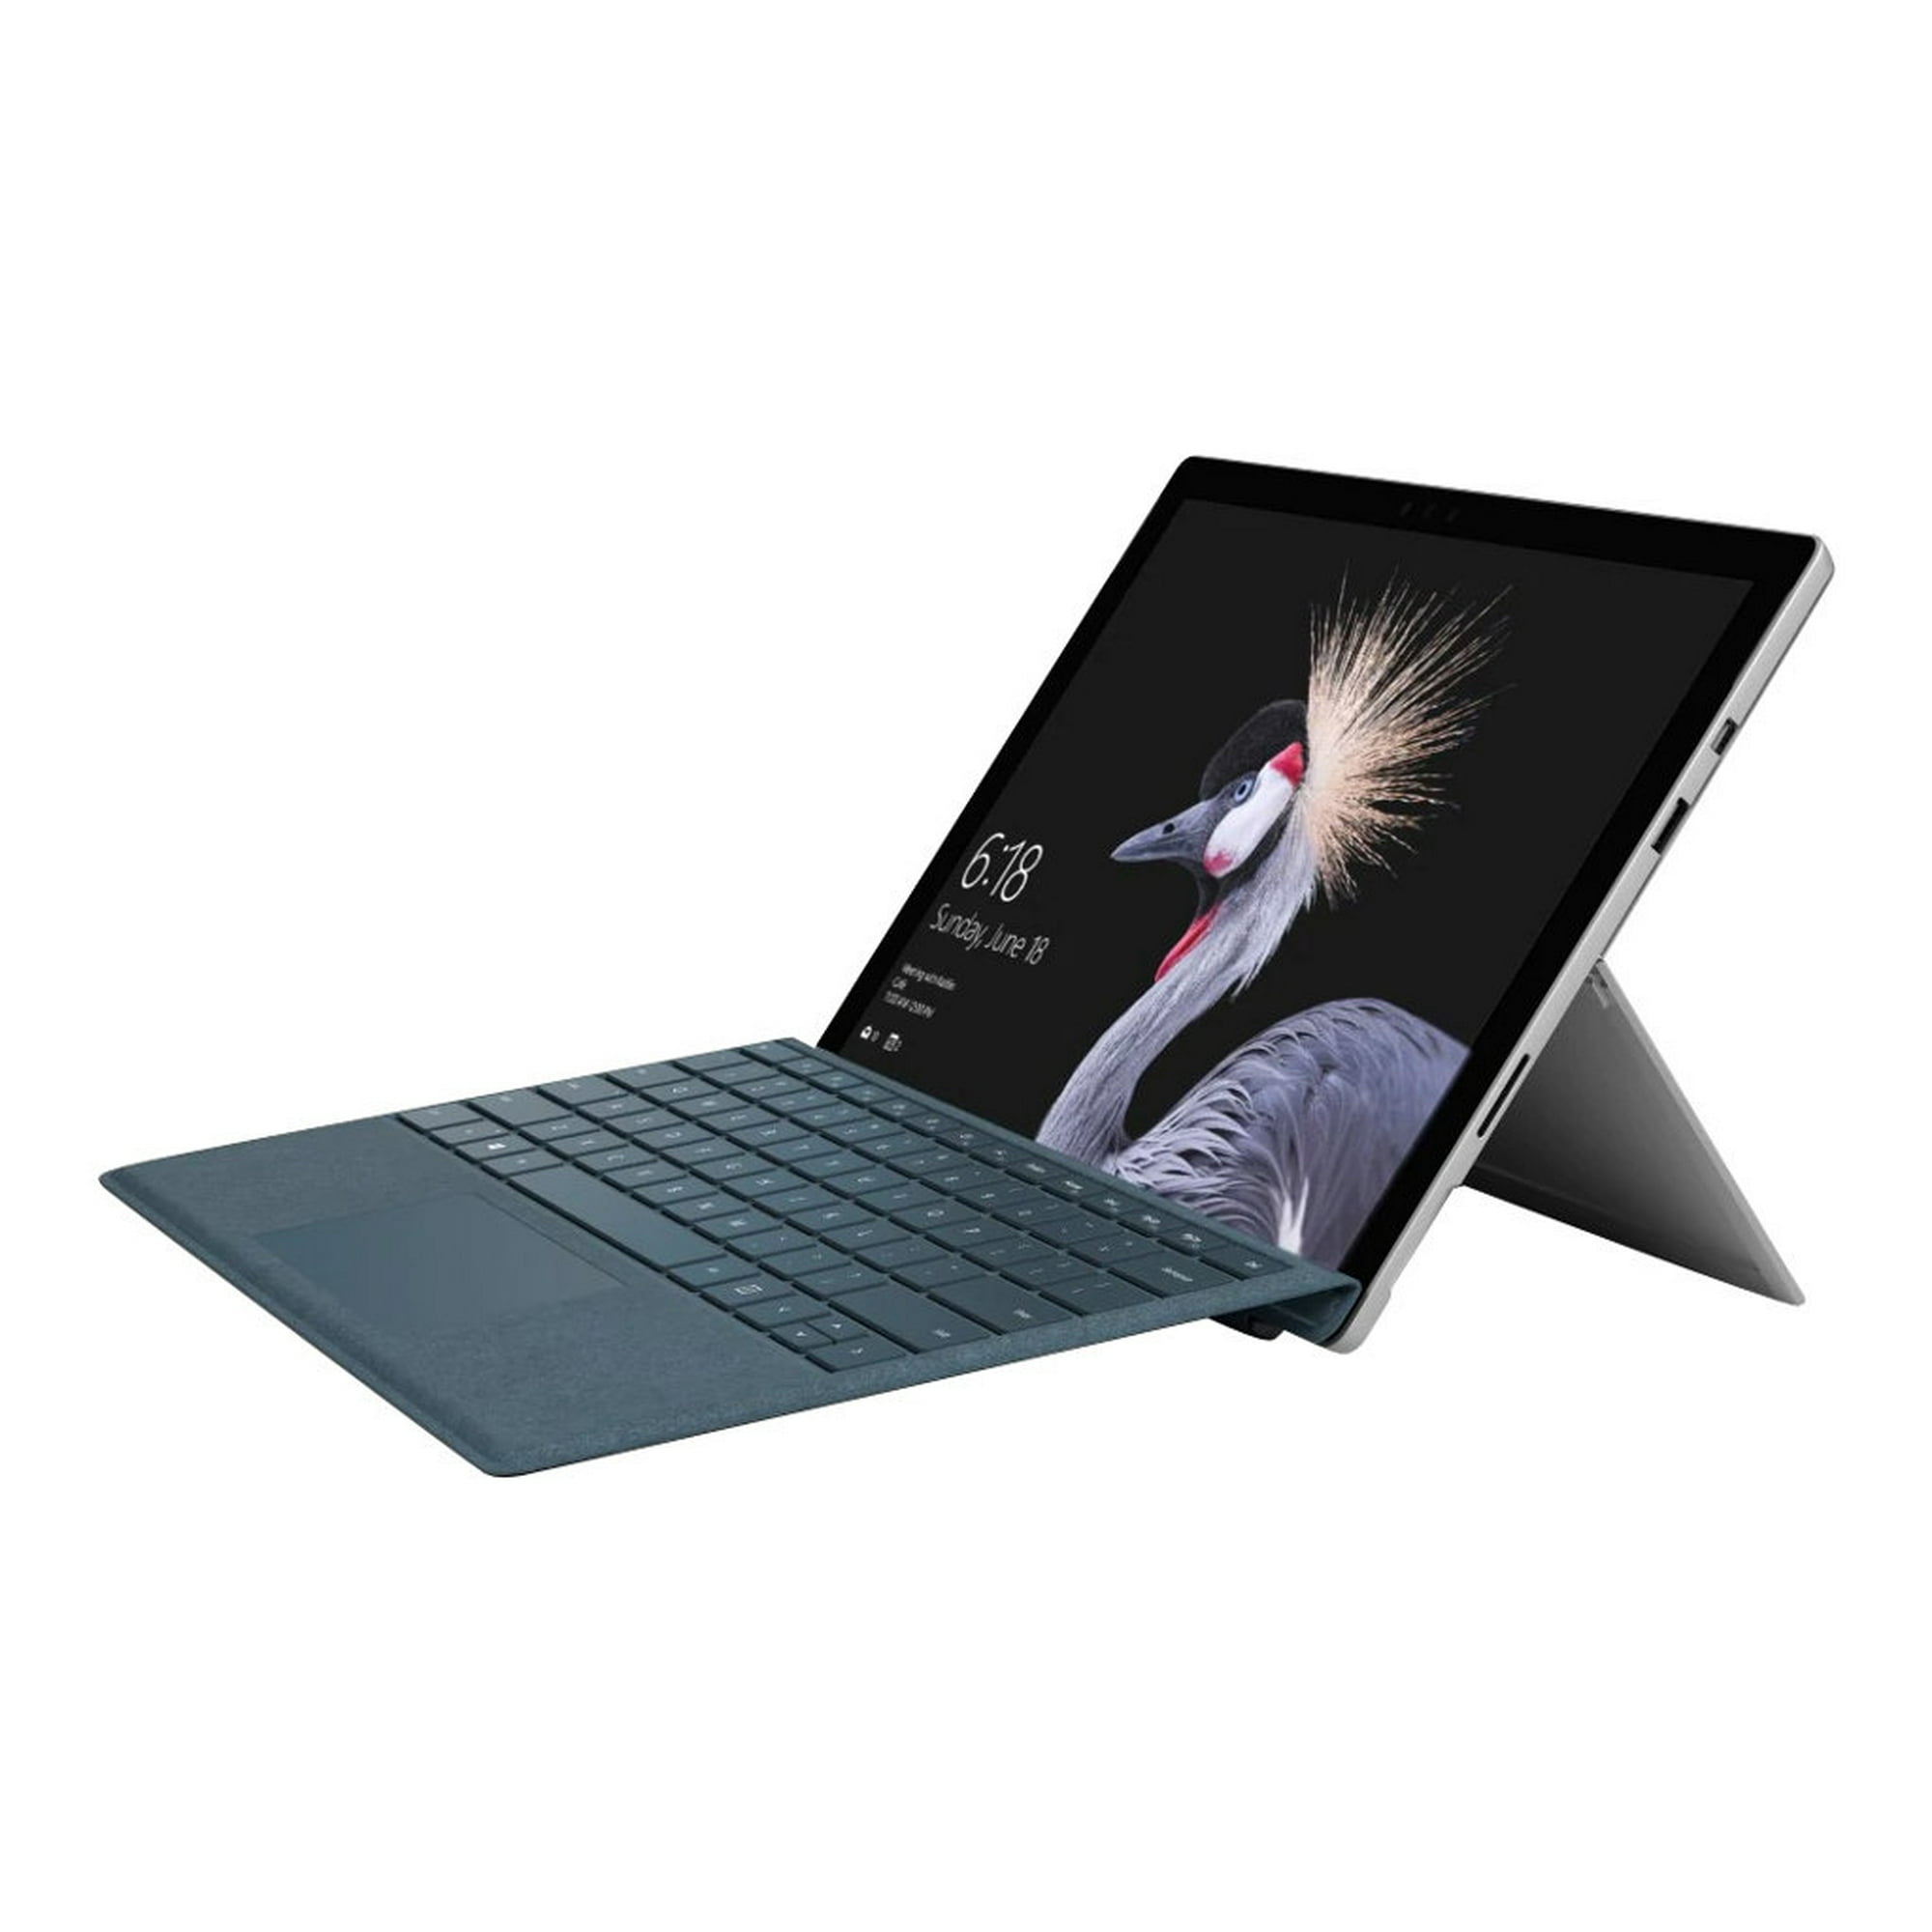 Microsoft Surface Pro 3 Tablet Computer with Keyboard - Intel Core ...